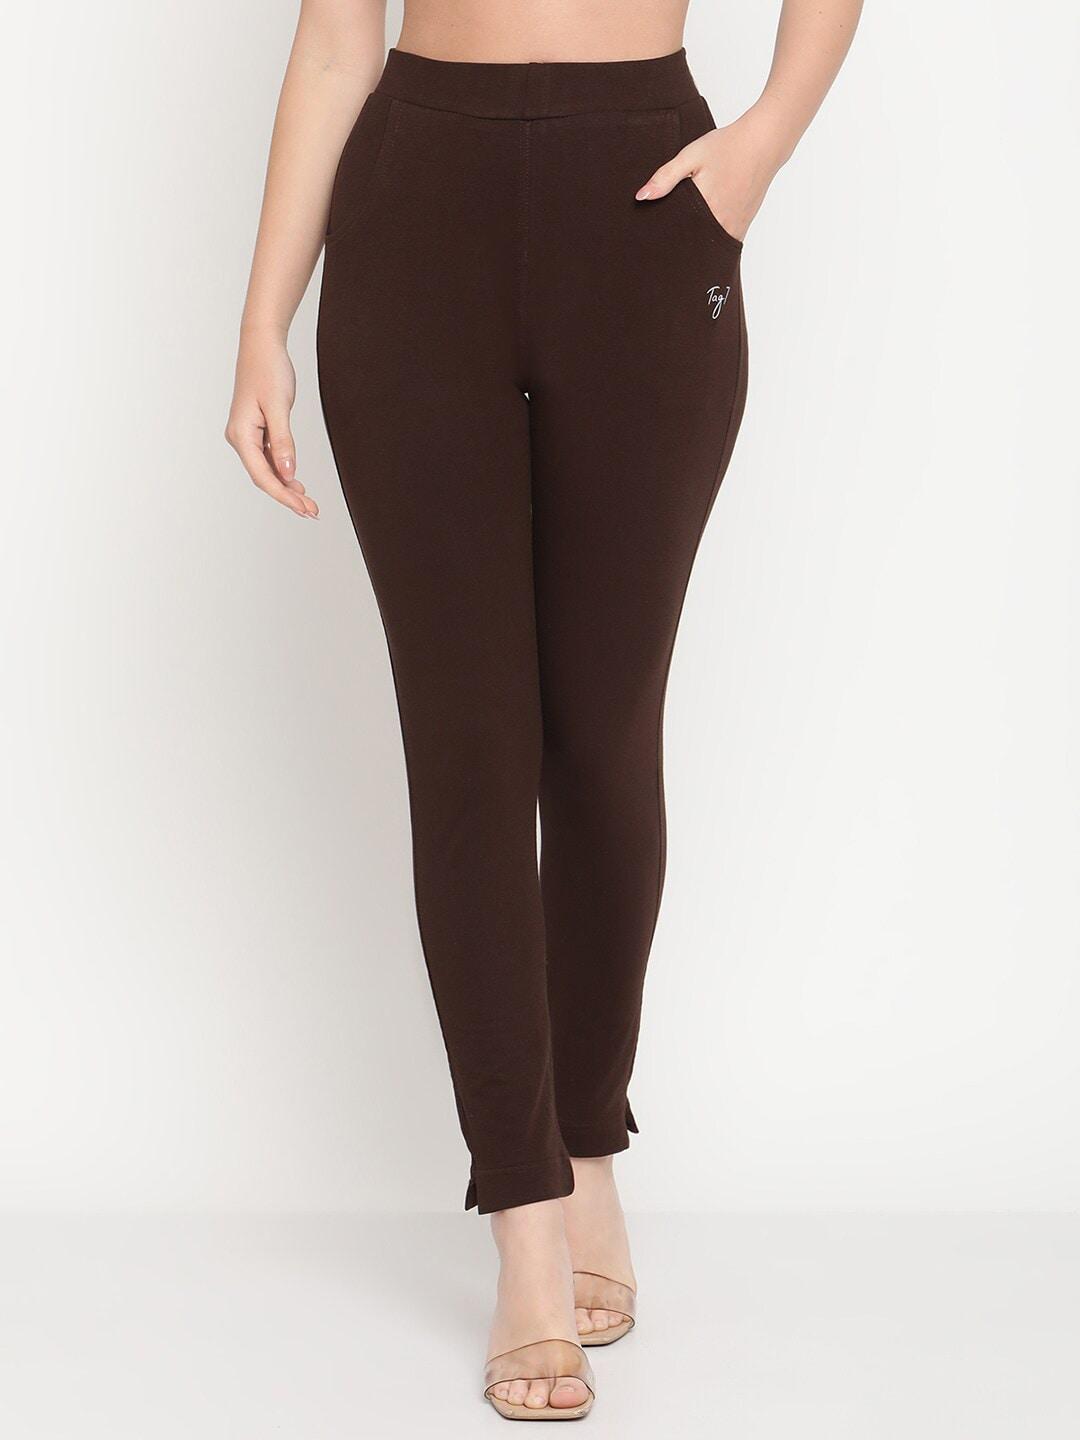 tag-7-women-brown-solid-ankle-length-jeggings